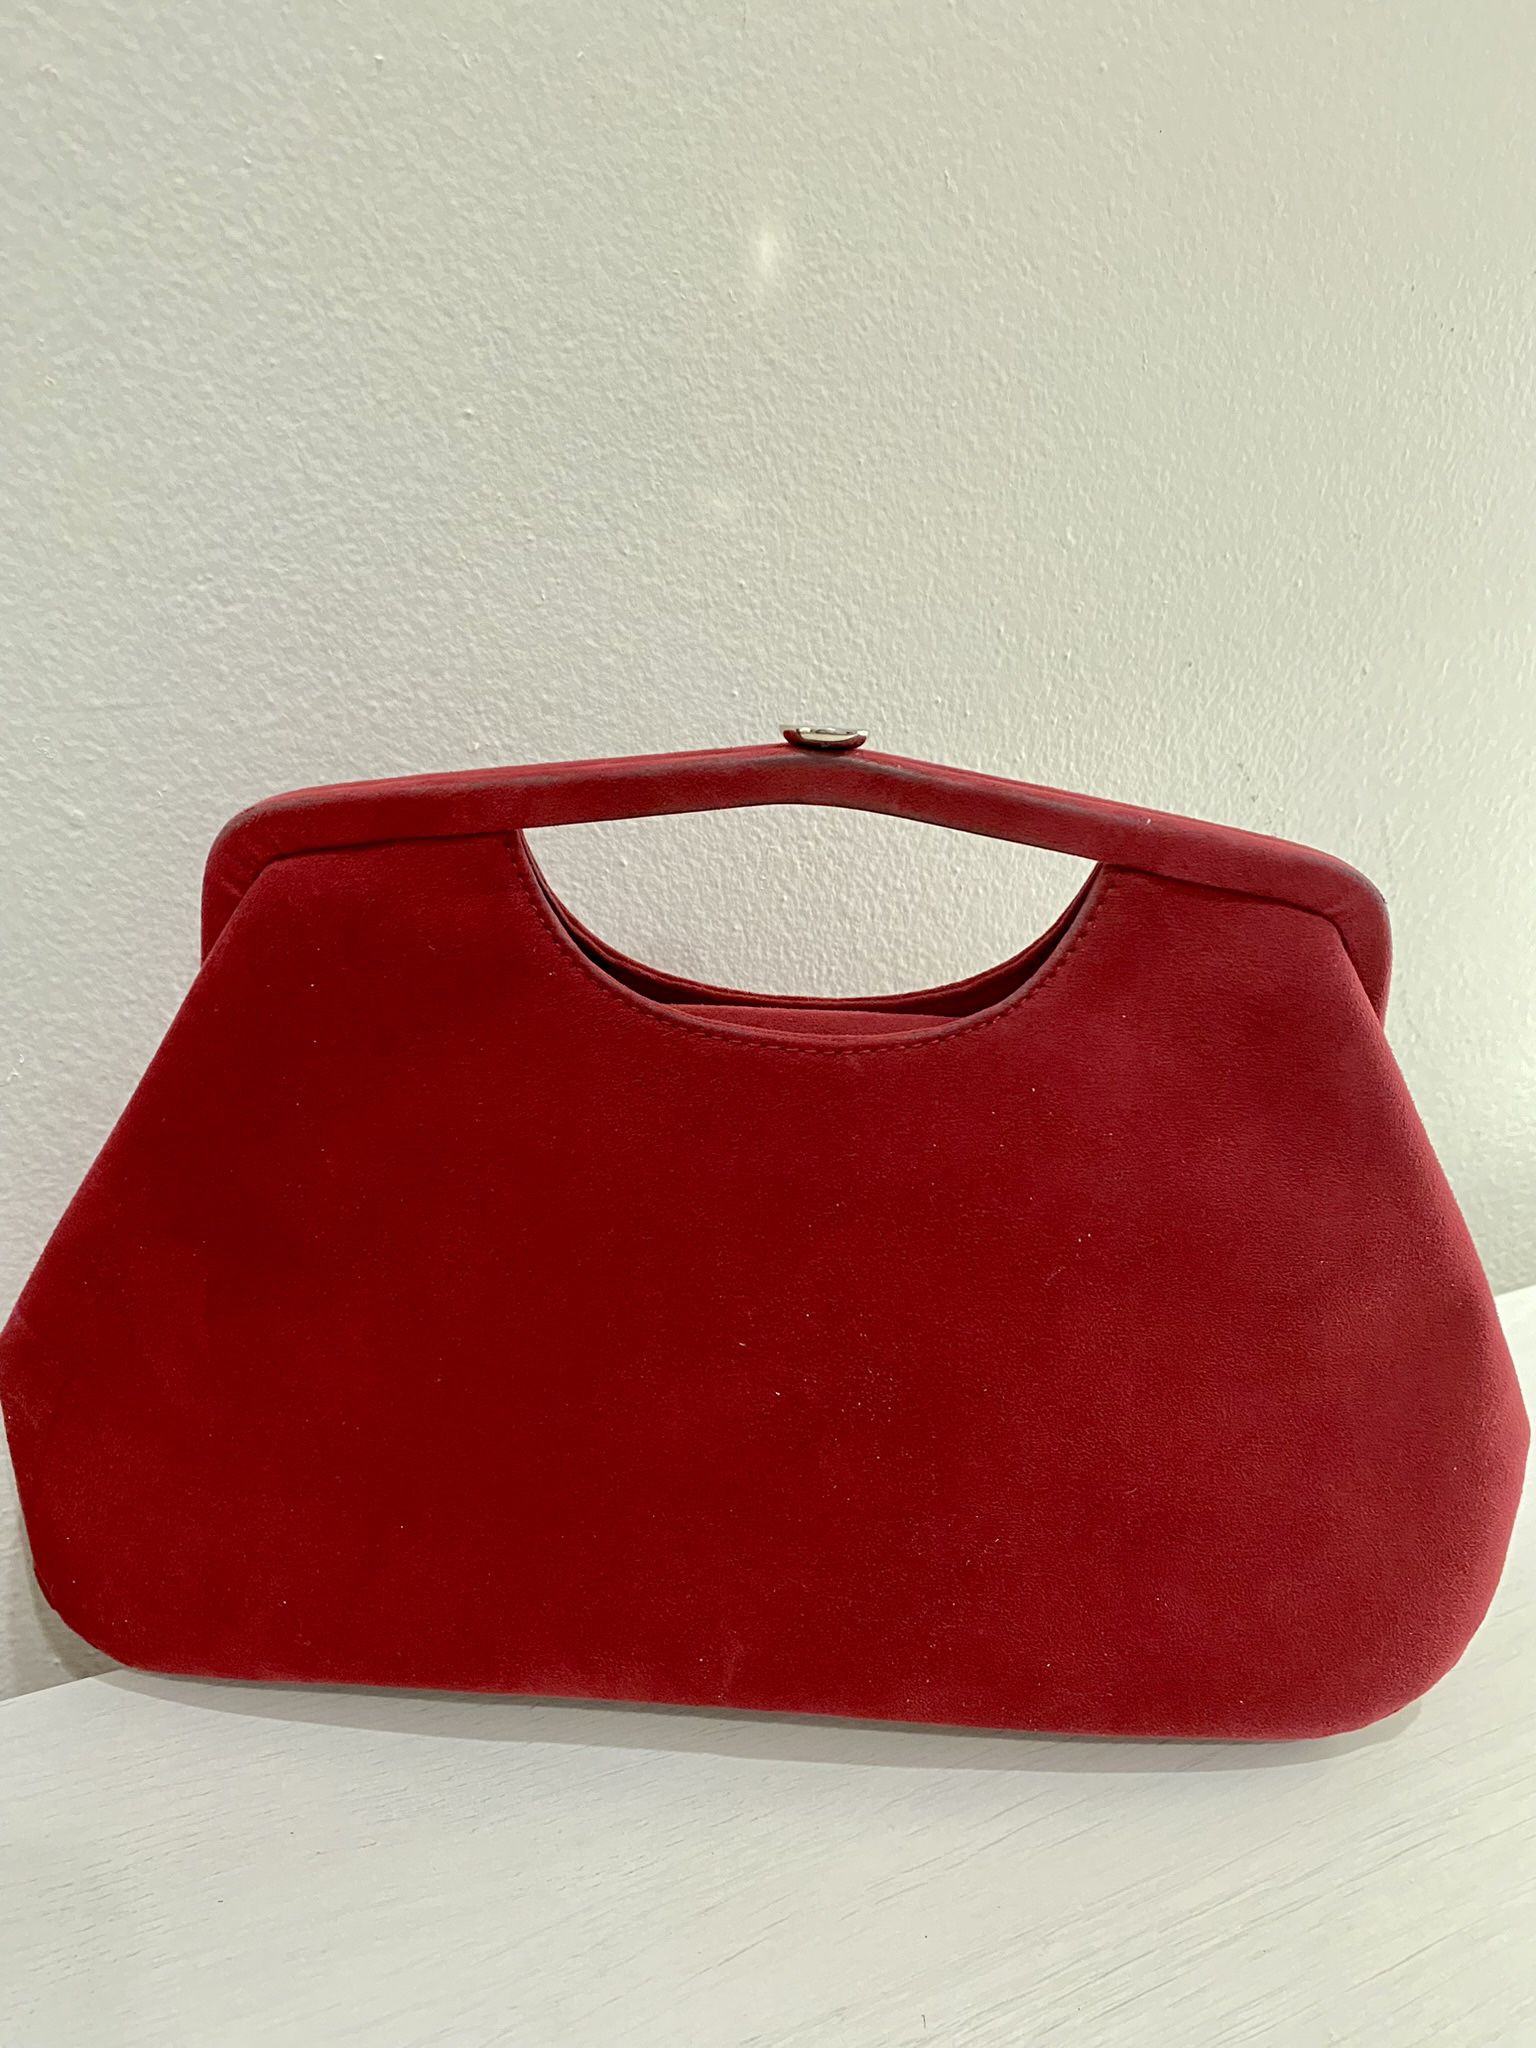 VINTAGE RED VELVET CLUTCH PURSE FROM THE 90’S